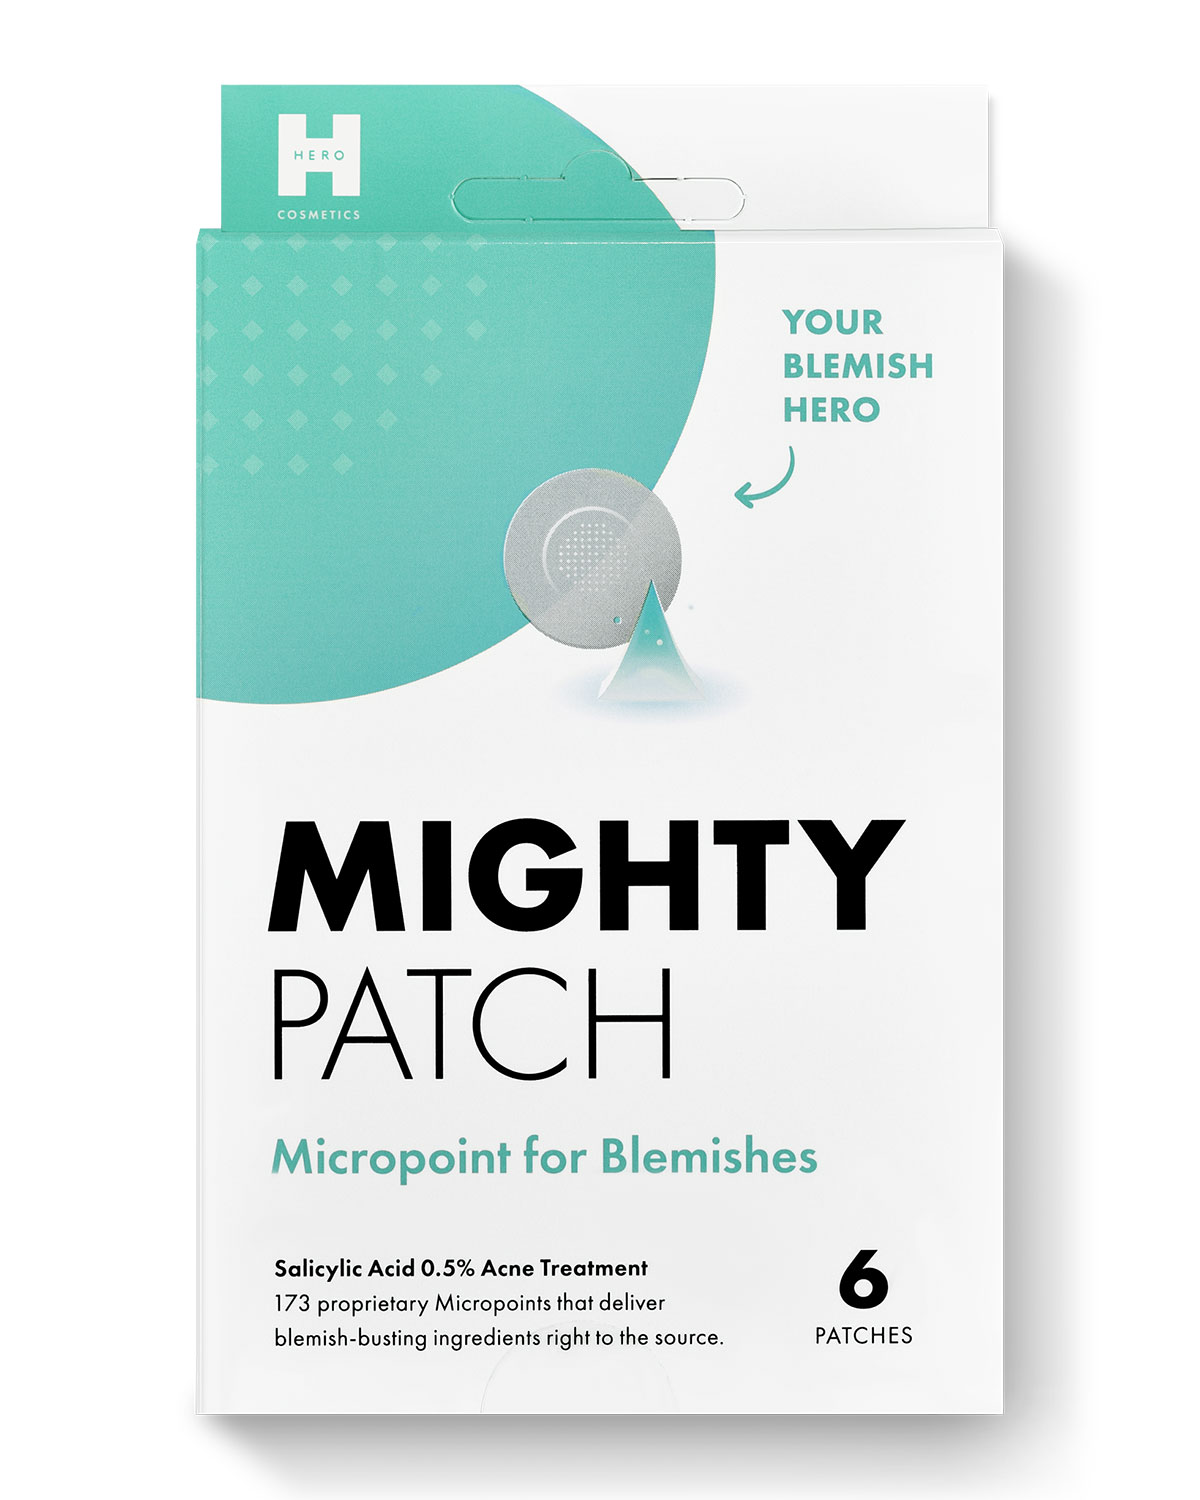 Hero Cosmetics Mighty Patch Micropoint For Blemishes, 6 Patches